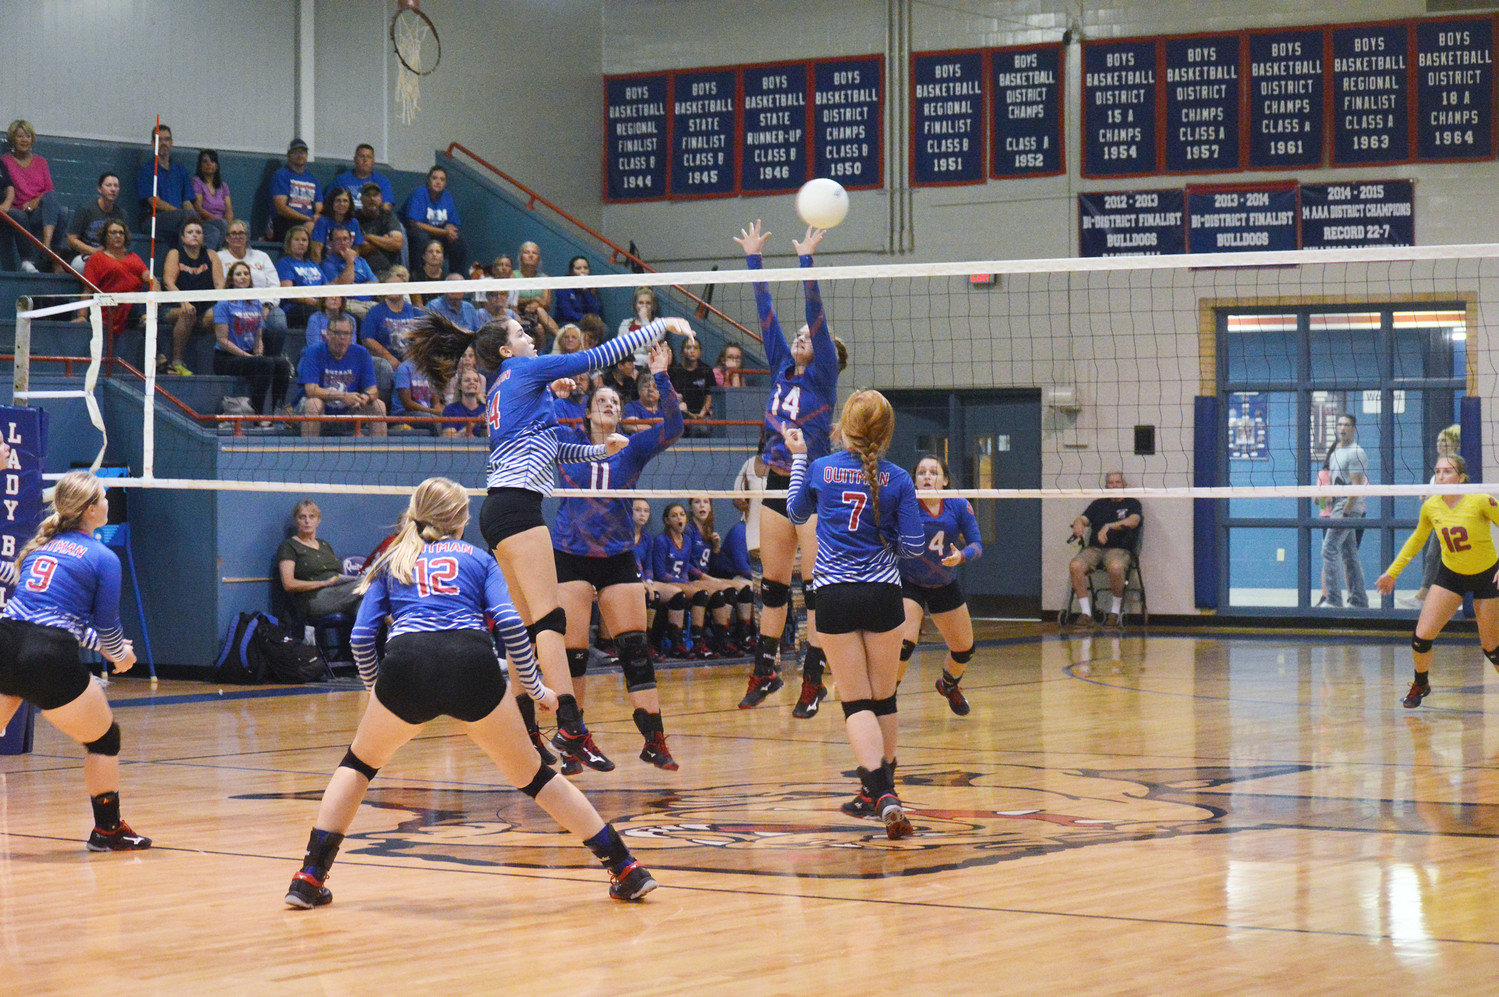 Ava Burroughs (14) sends a kill shot over Alba-Golden’s Macie Pendergrass (14) in last Tuesday’s match at Quitman.